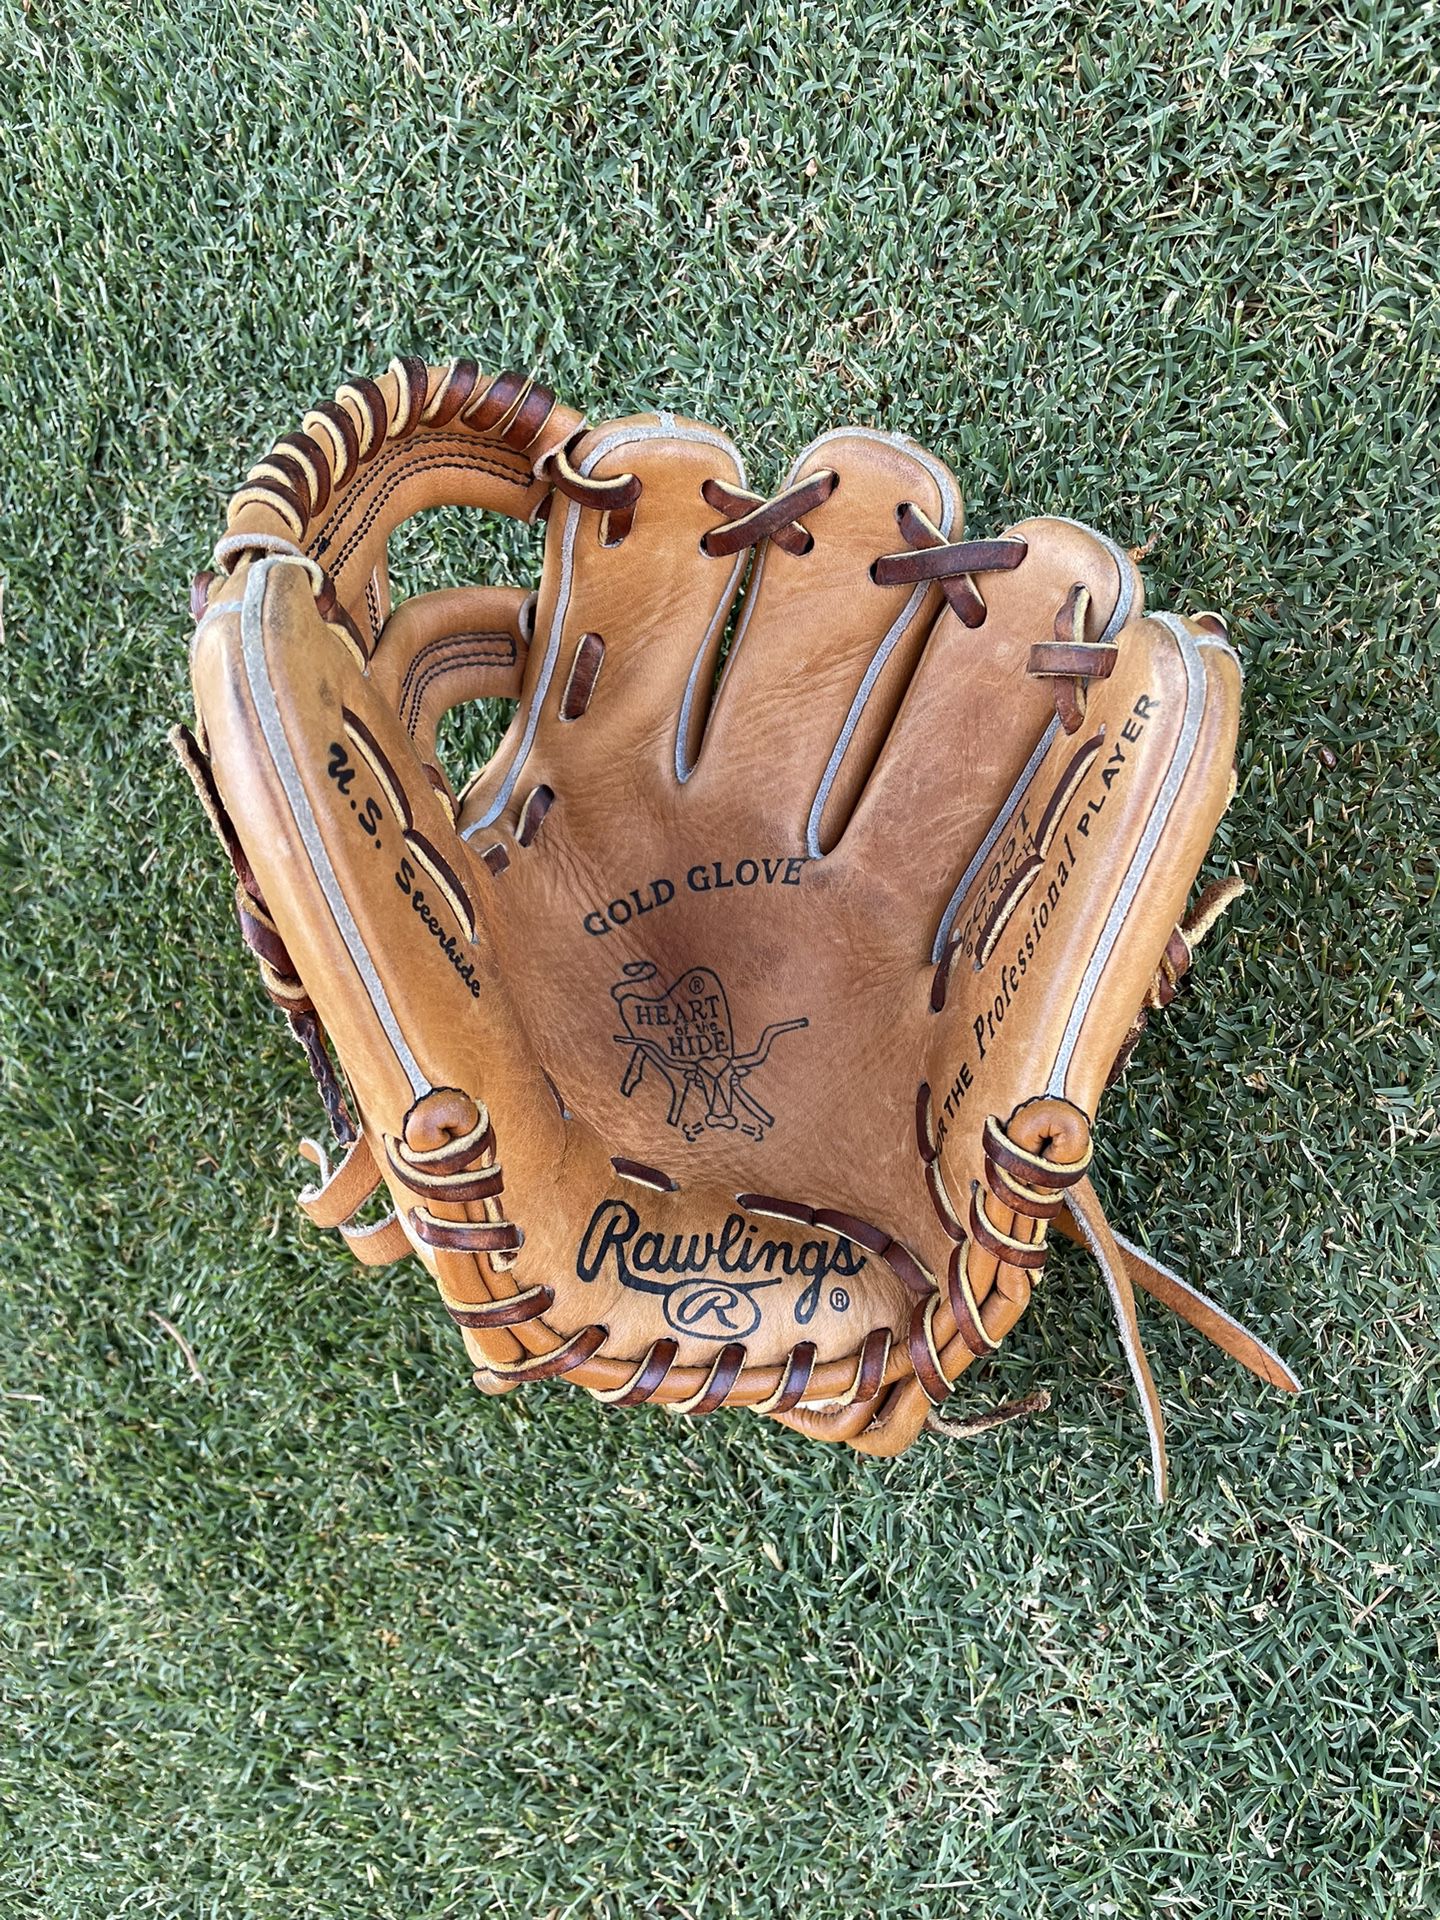 RARE Rawlings Heart Of The Hide Gold Glove. 9.5 in